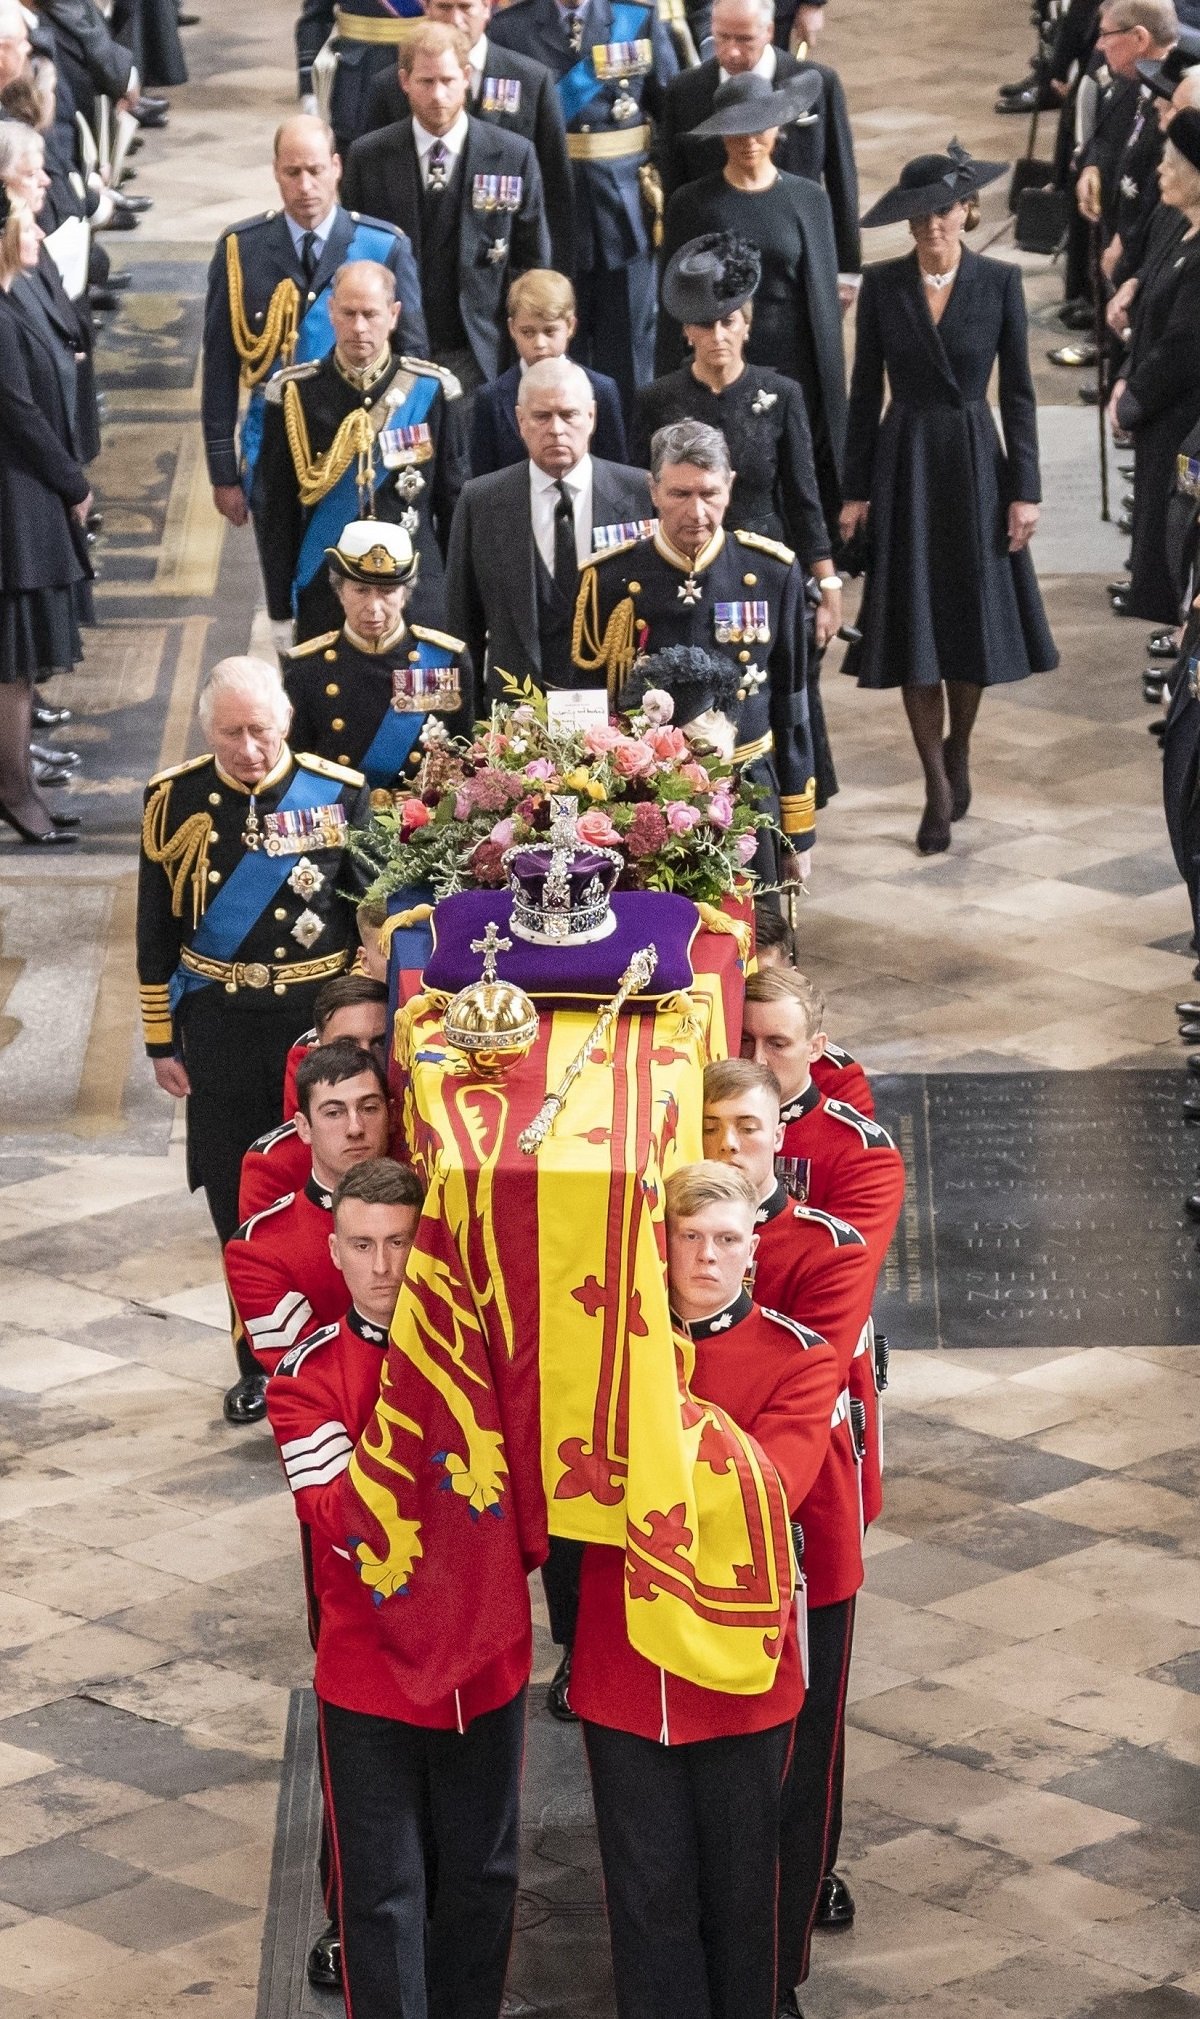 Members of the royal family follow behind the coffin of Queen Elizabeth II as it is carried out of Westminster Abbey